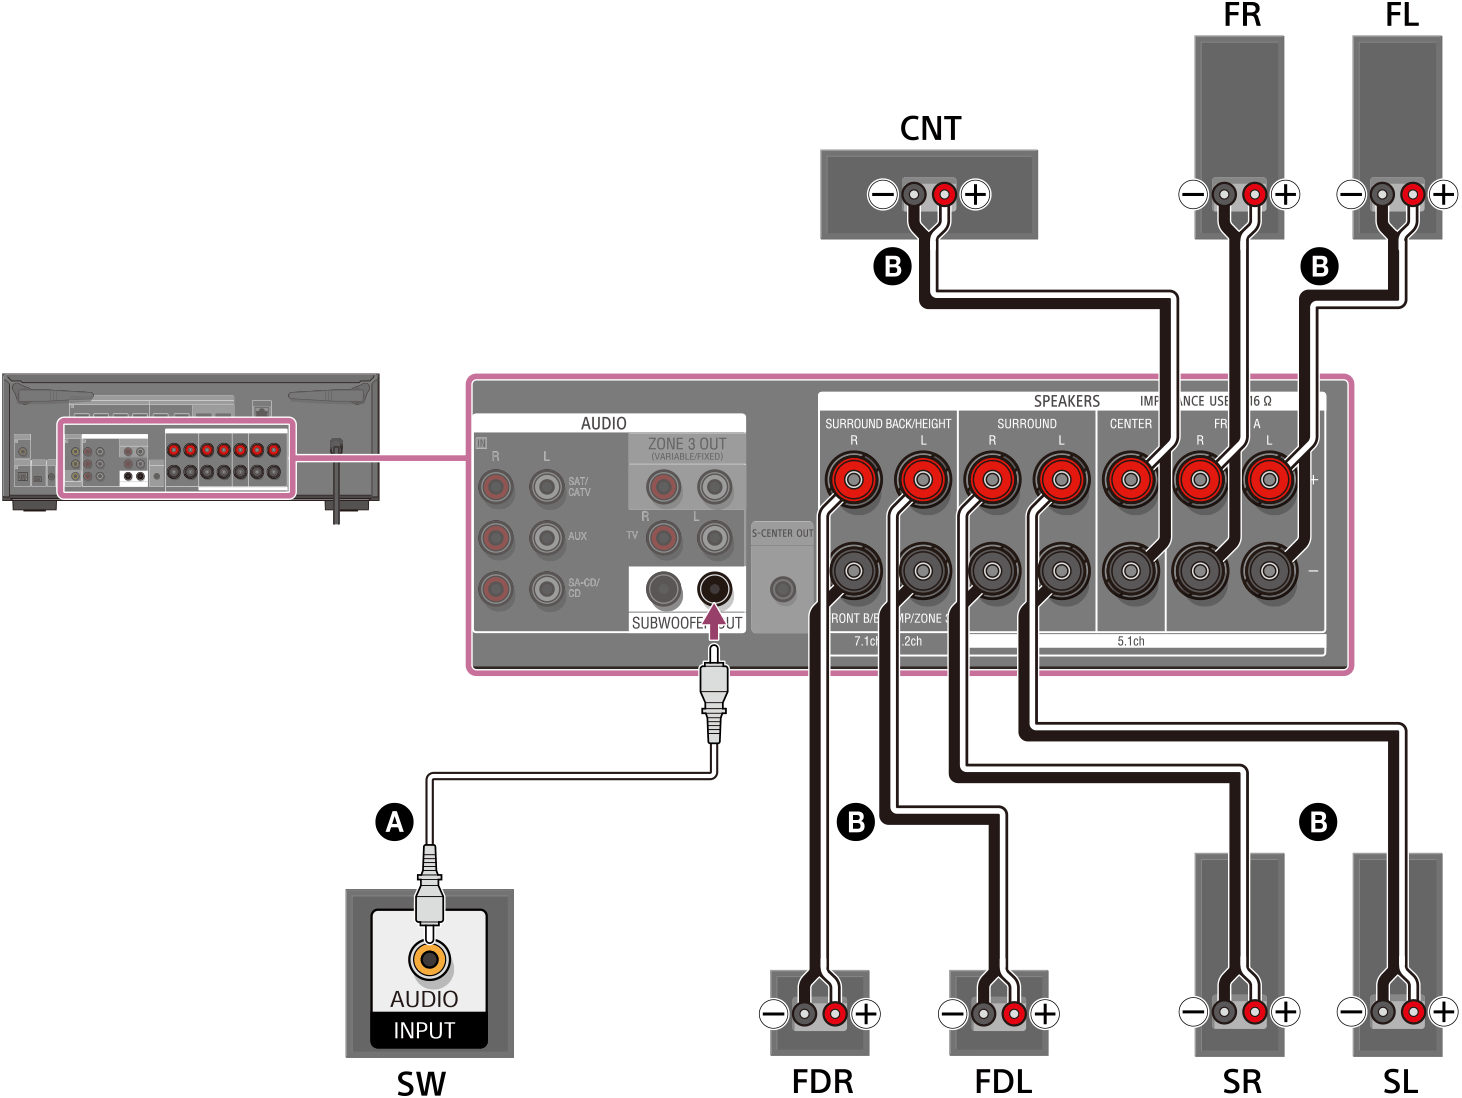 Illustration of connecting each speaker to the speaker terminals on the rear of the unit. Connect the left and right front speakers, left and right surround speakers, left and right front Dolby Atmos enabled speakers, and center speaker to their respective speaker terminals using speaker cables (not supplied). Connect the subwoofer to the SUBWOOFER OUT terminal with a monaural audio cable (not supplied).